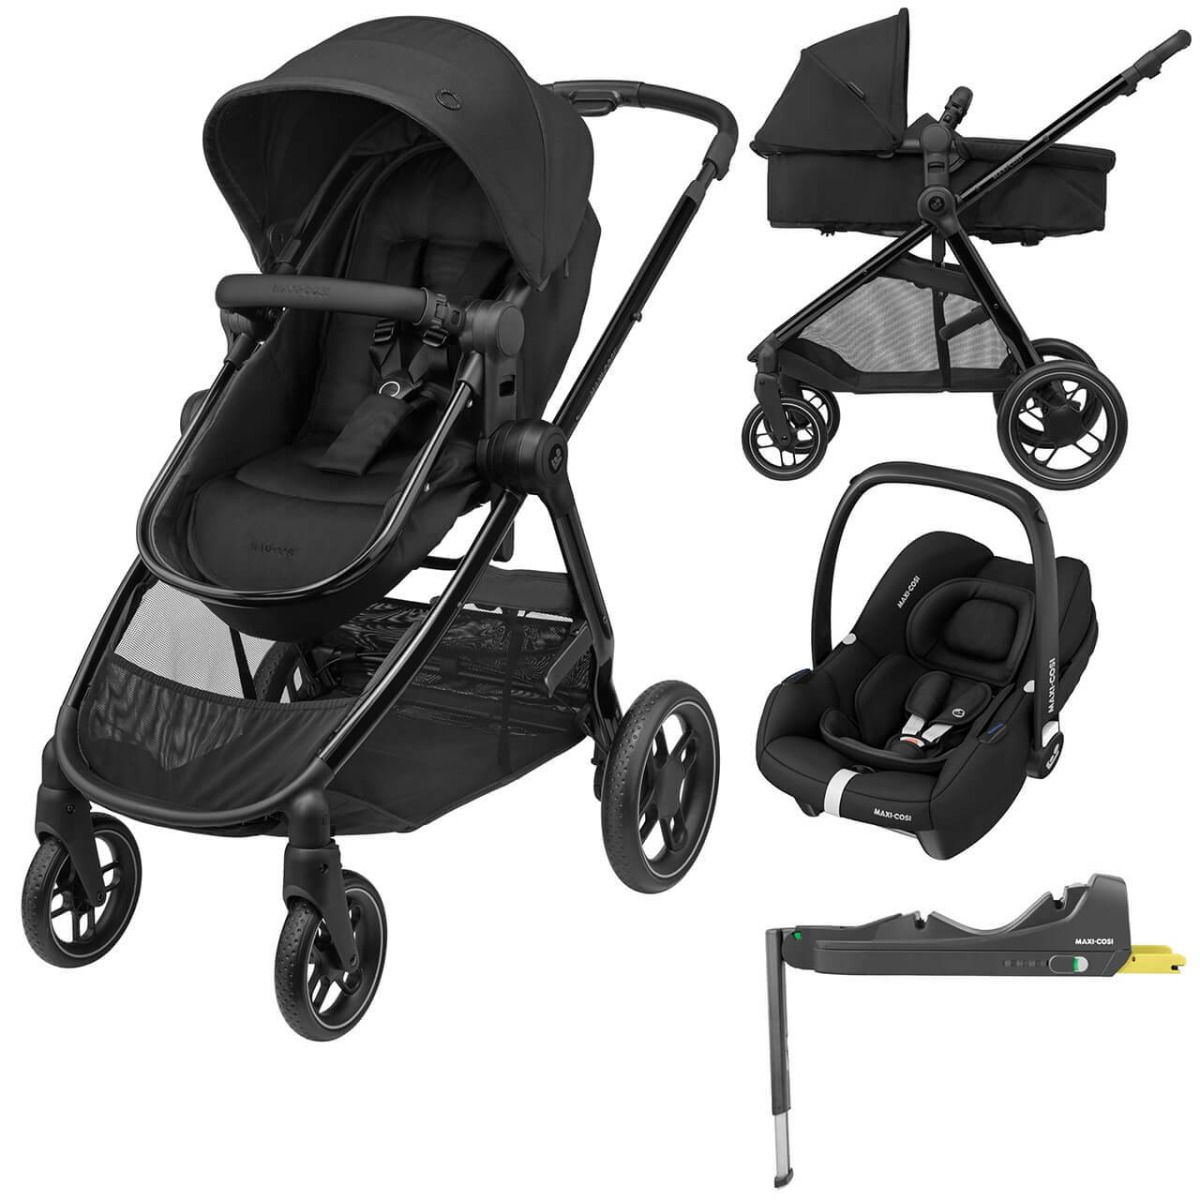 Maxi-Cosi Zelia S Trio 3-in-1 Prams Travel System, Foldable, Compact and  Reclining Baby Pushchair, with CabrioFix S i-Size Baby Car Seat,  Accessories, Nursery Bag, 0-4 Years, Up to 22 kg, Grey 